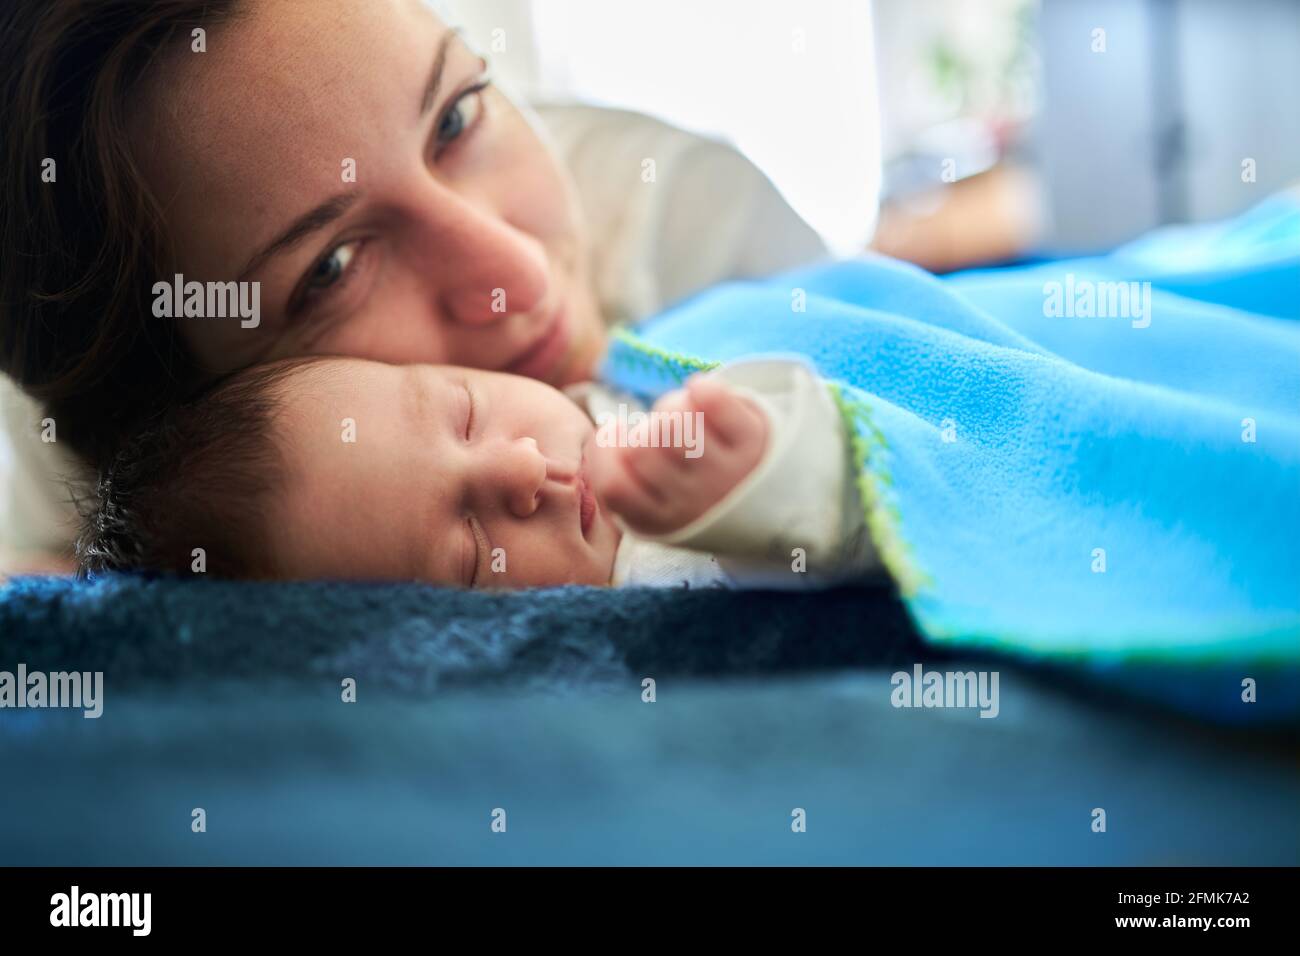 A mother expressing her love for her newborn child while the baby is peacefully sleeping Stock Photo